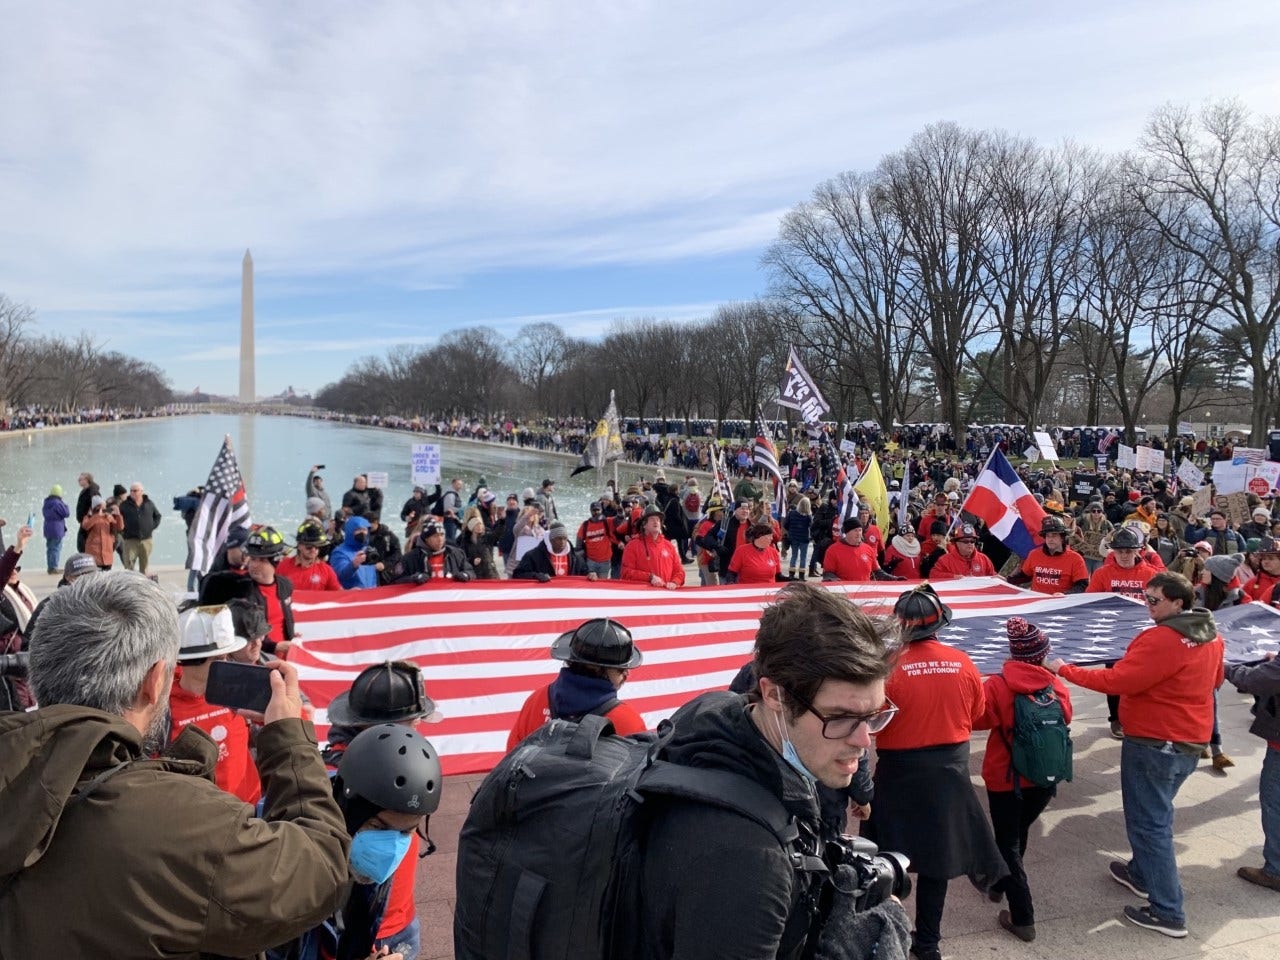 Washington DC 'Defeat the Mandates' march calls to end for COVID-19 vaccine requirements: 'draconian laws'